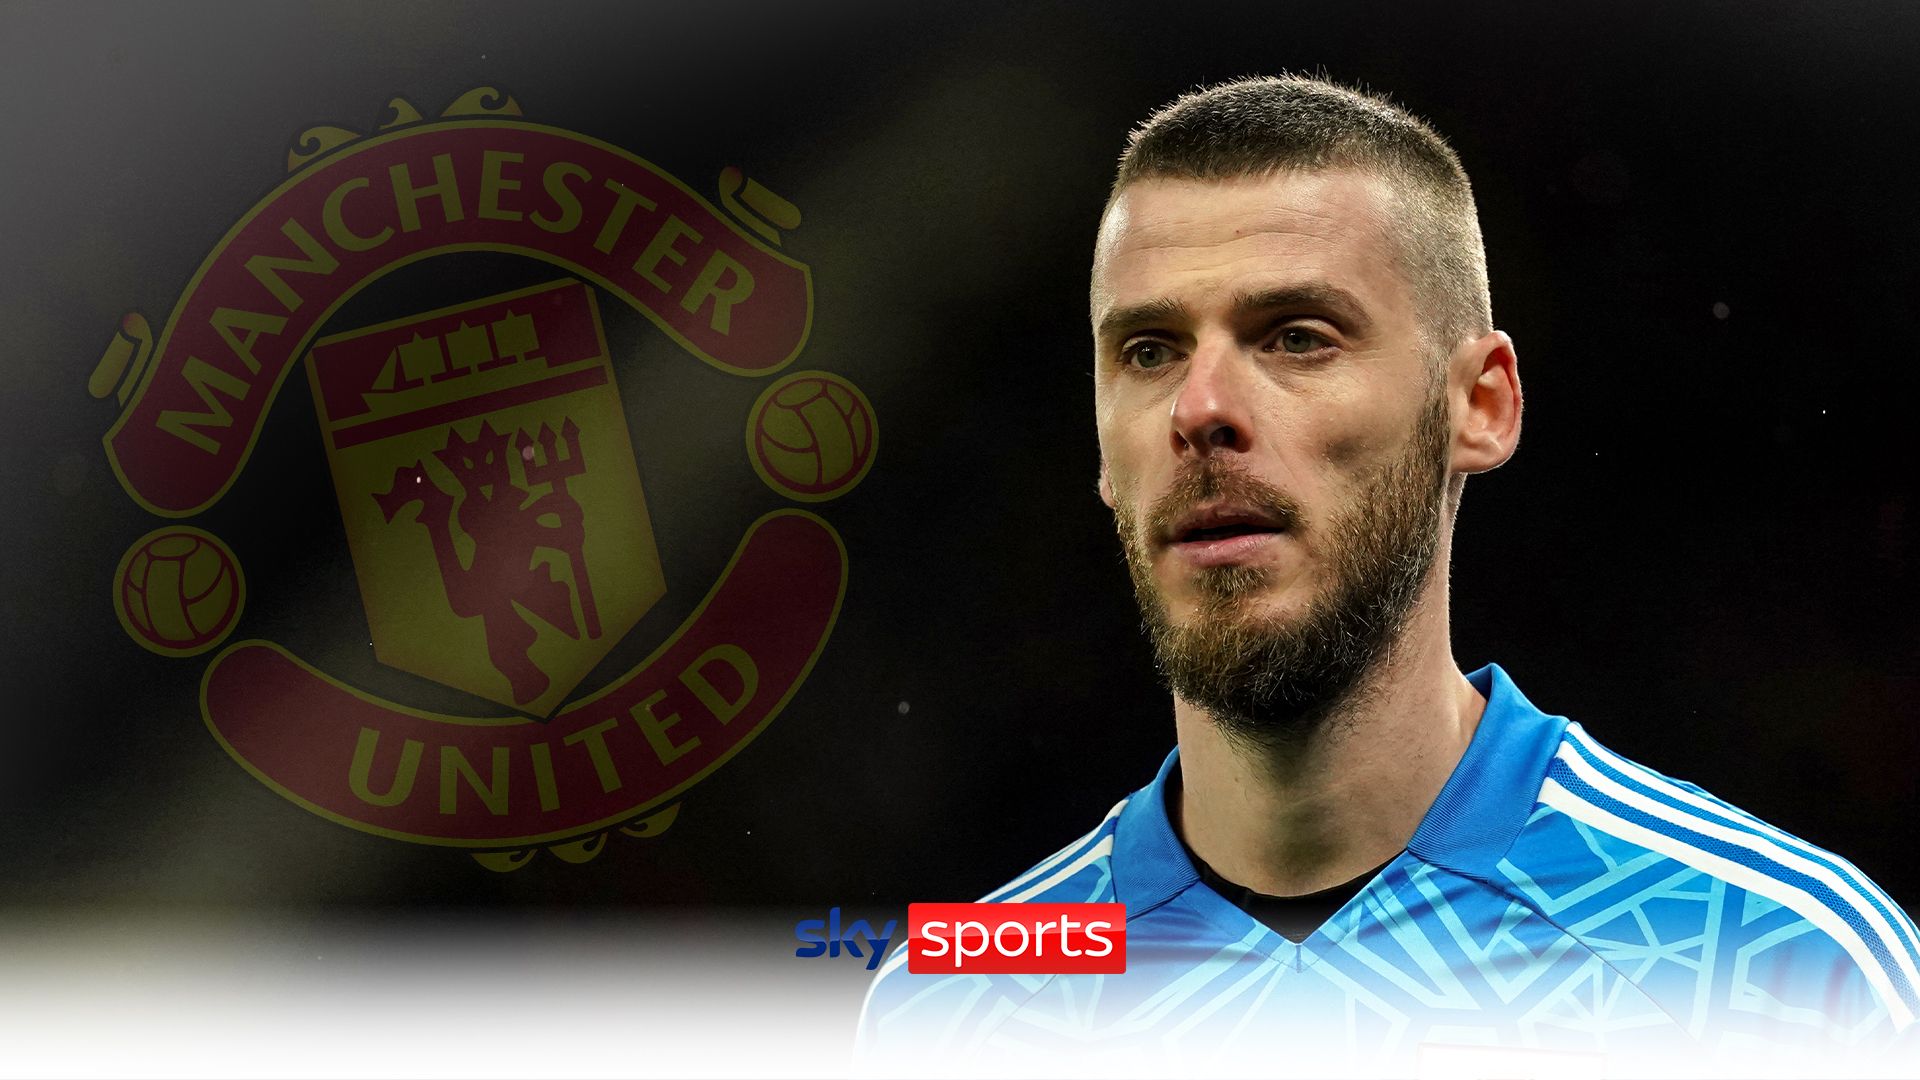 What is going on with De Gea's future at Man Utd?